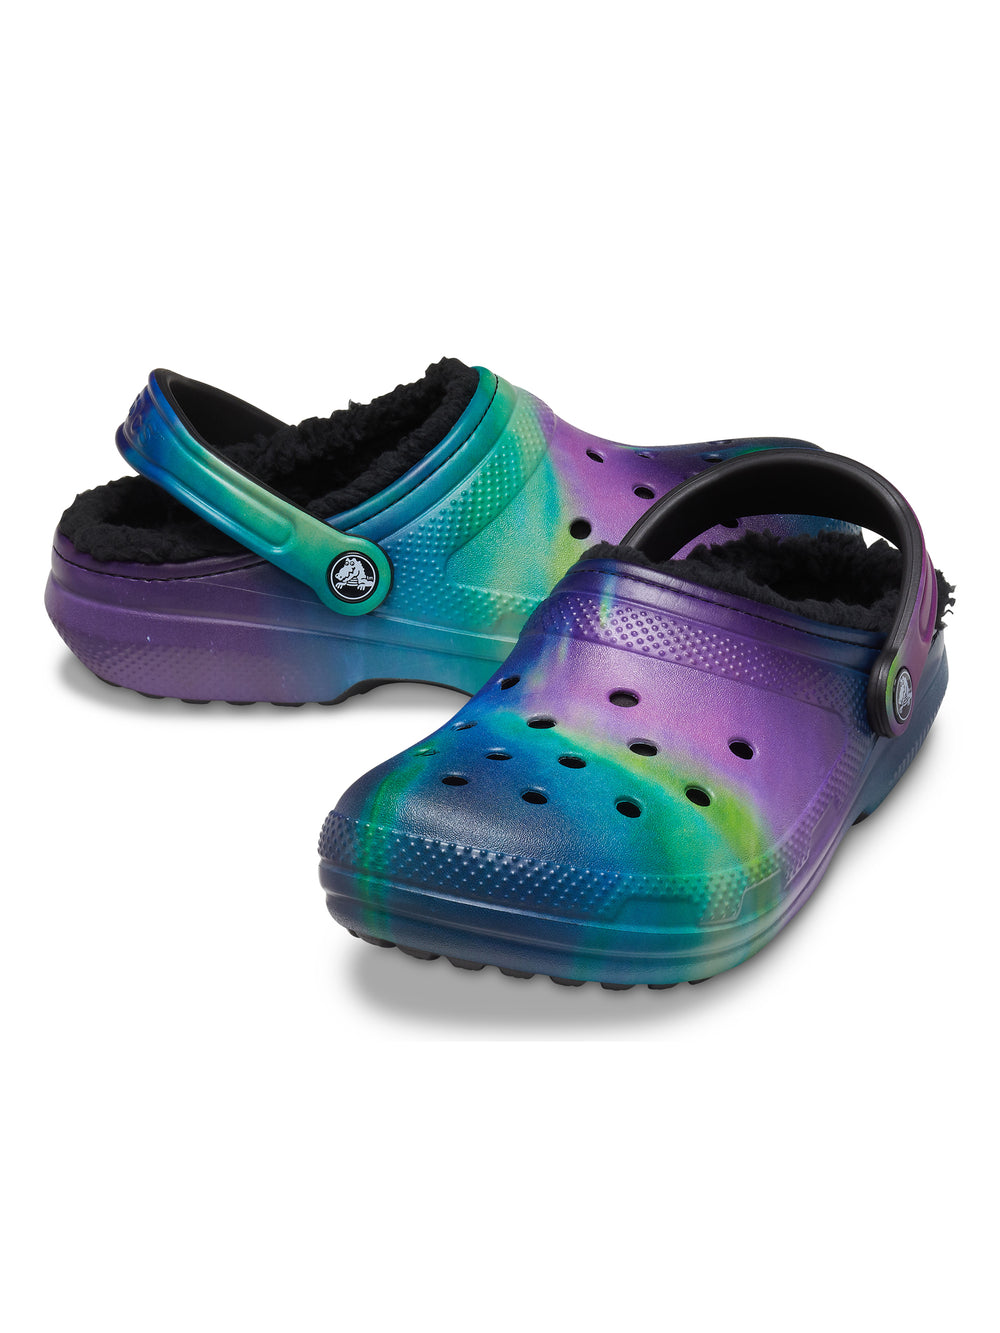 CROCS CLASSIC LINED OUT OF THIS WORLD CLOGS - CLEARANCE